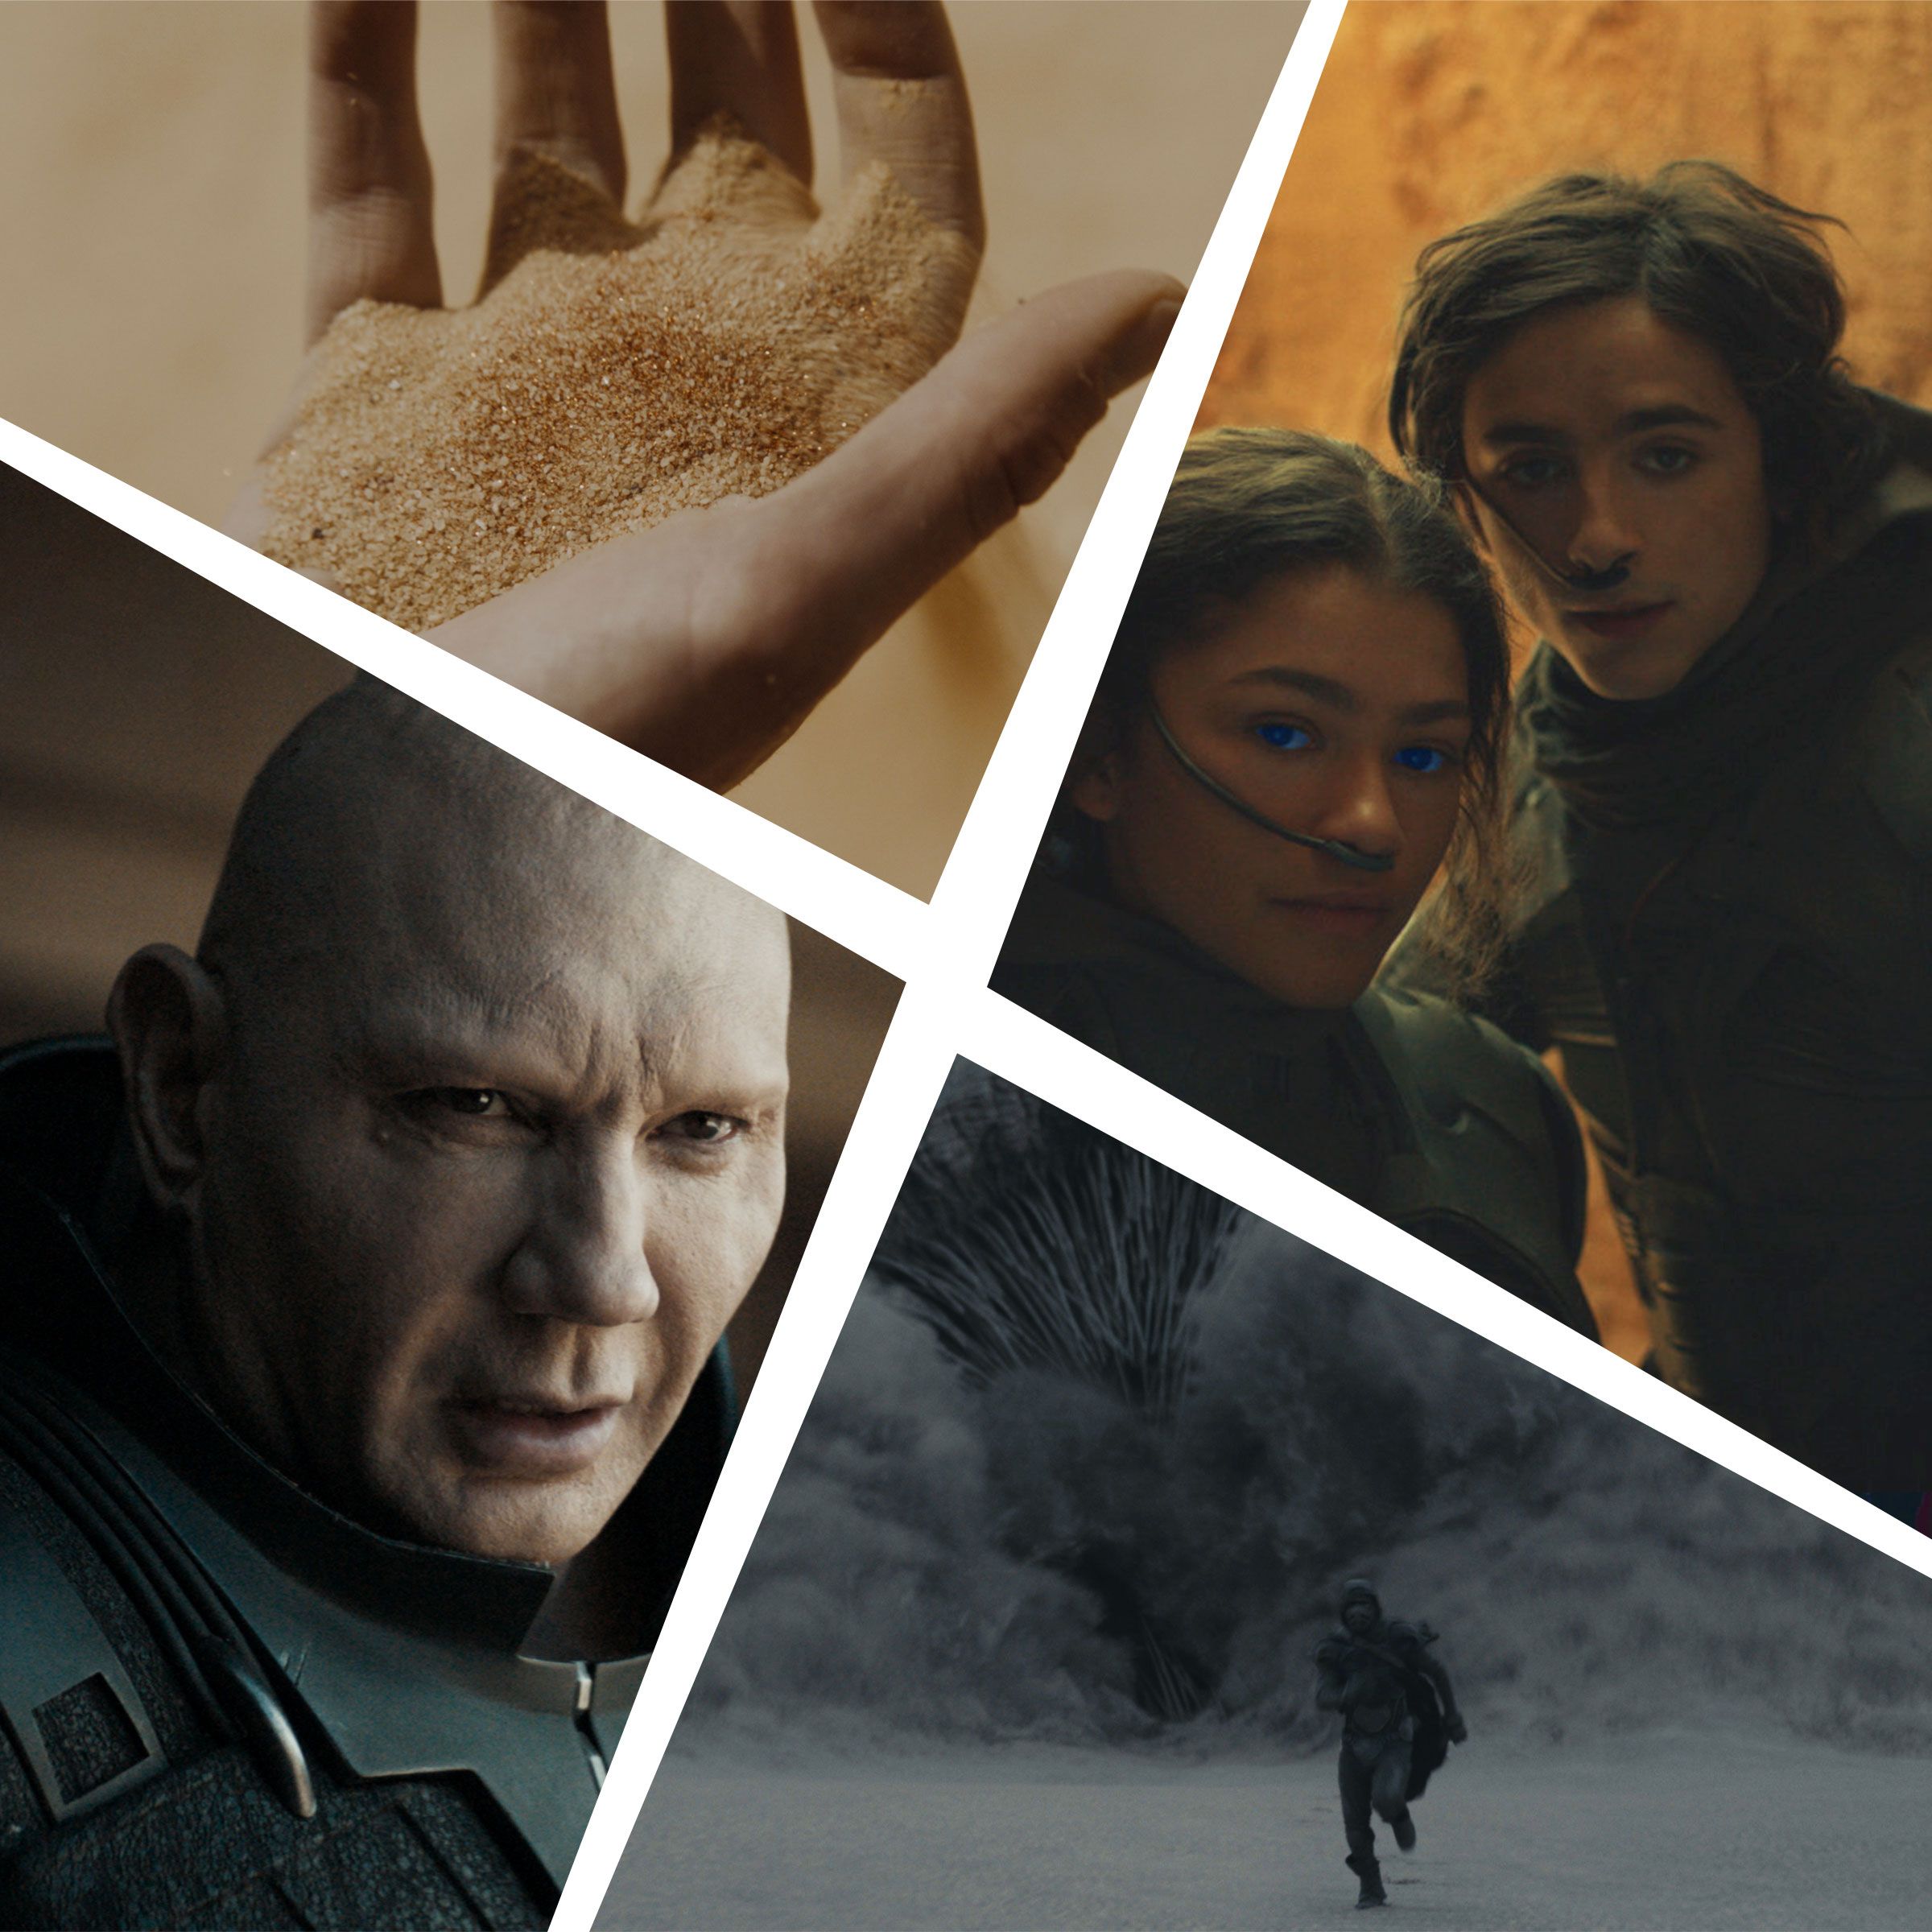 Can Dune: Part Two follow Lord of the Rings to win best picture Oscar?, Dune